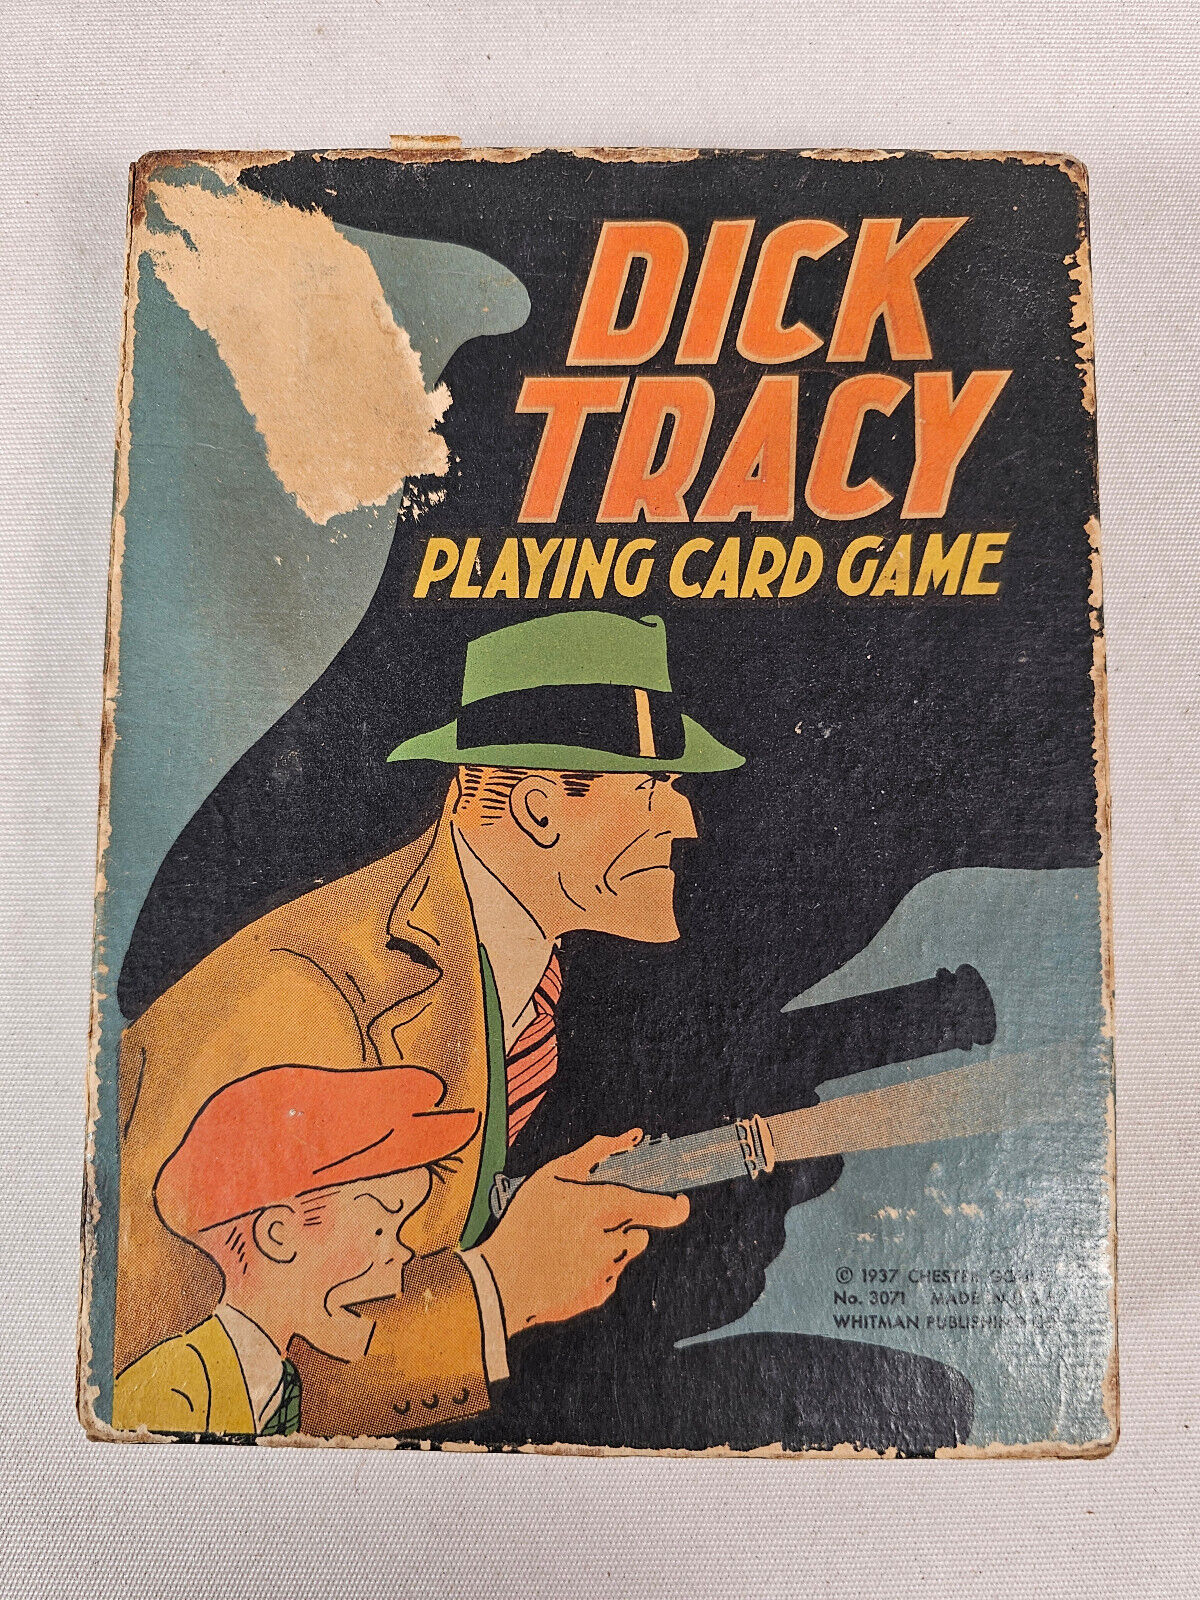 1937 Vintage Complete DICK TRACY Playing Card Game #3071 • Whitman Publishing Co